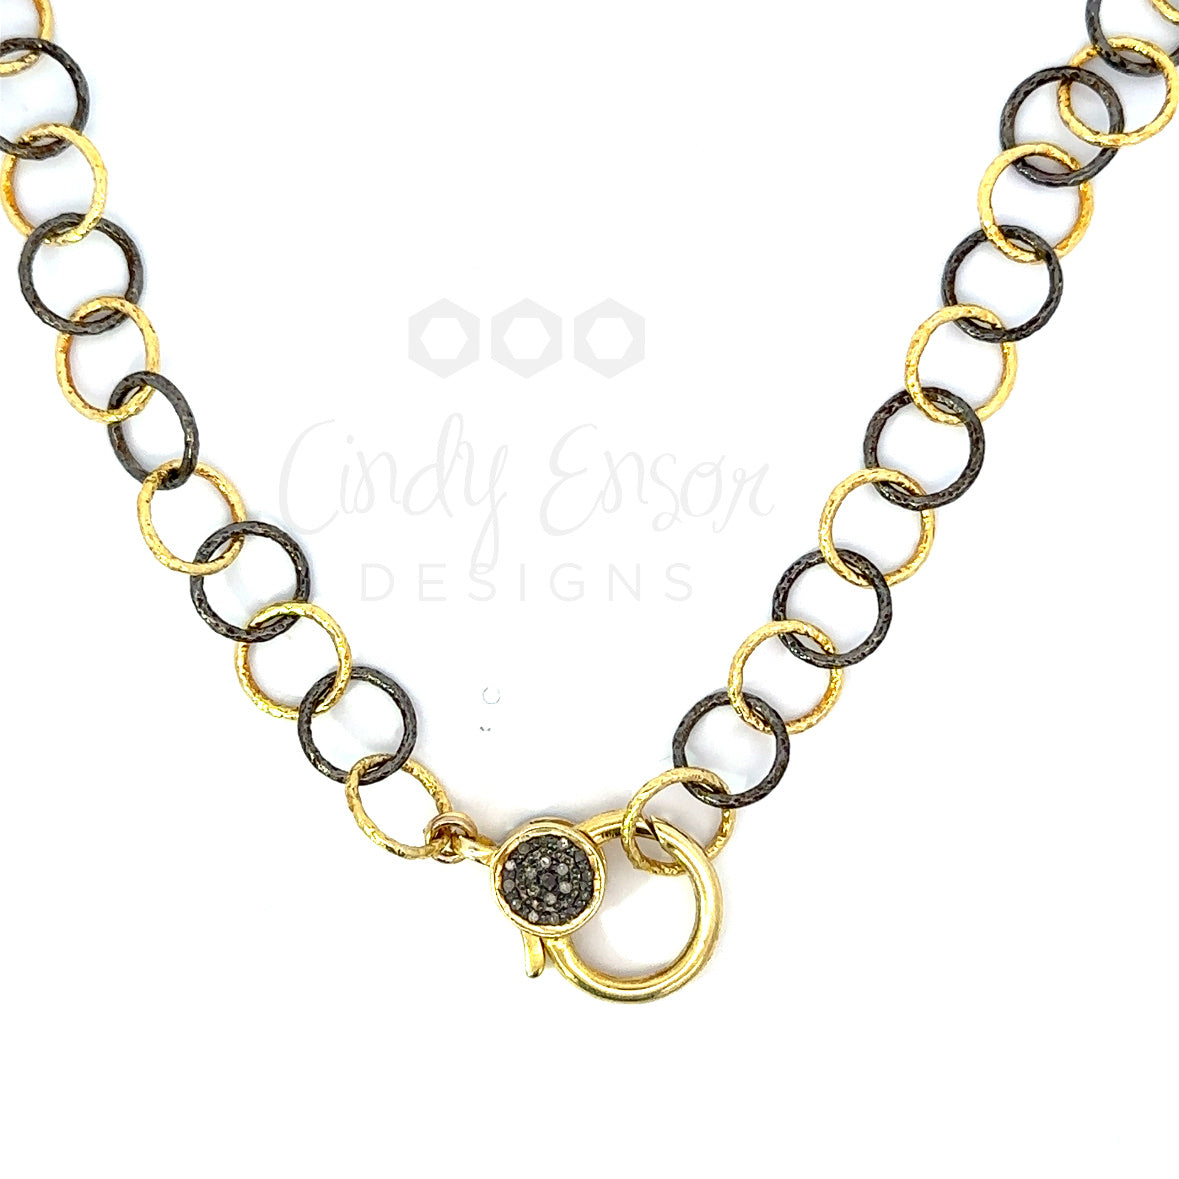 Mixed Metal Round Chain with Medium Vermeil Pave Lobster